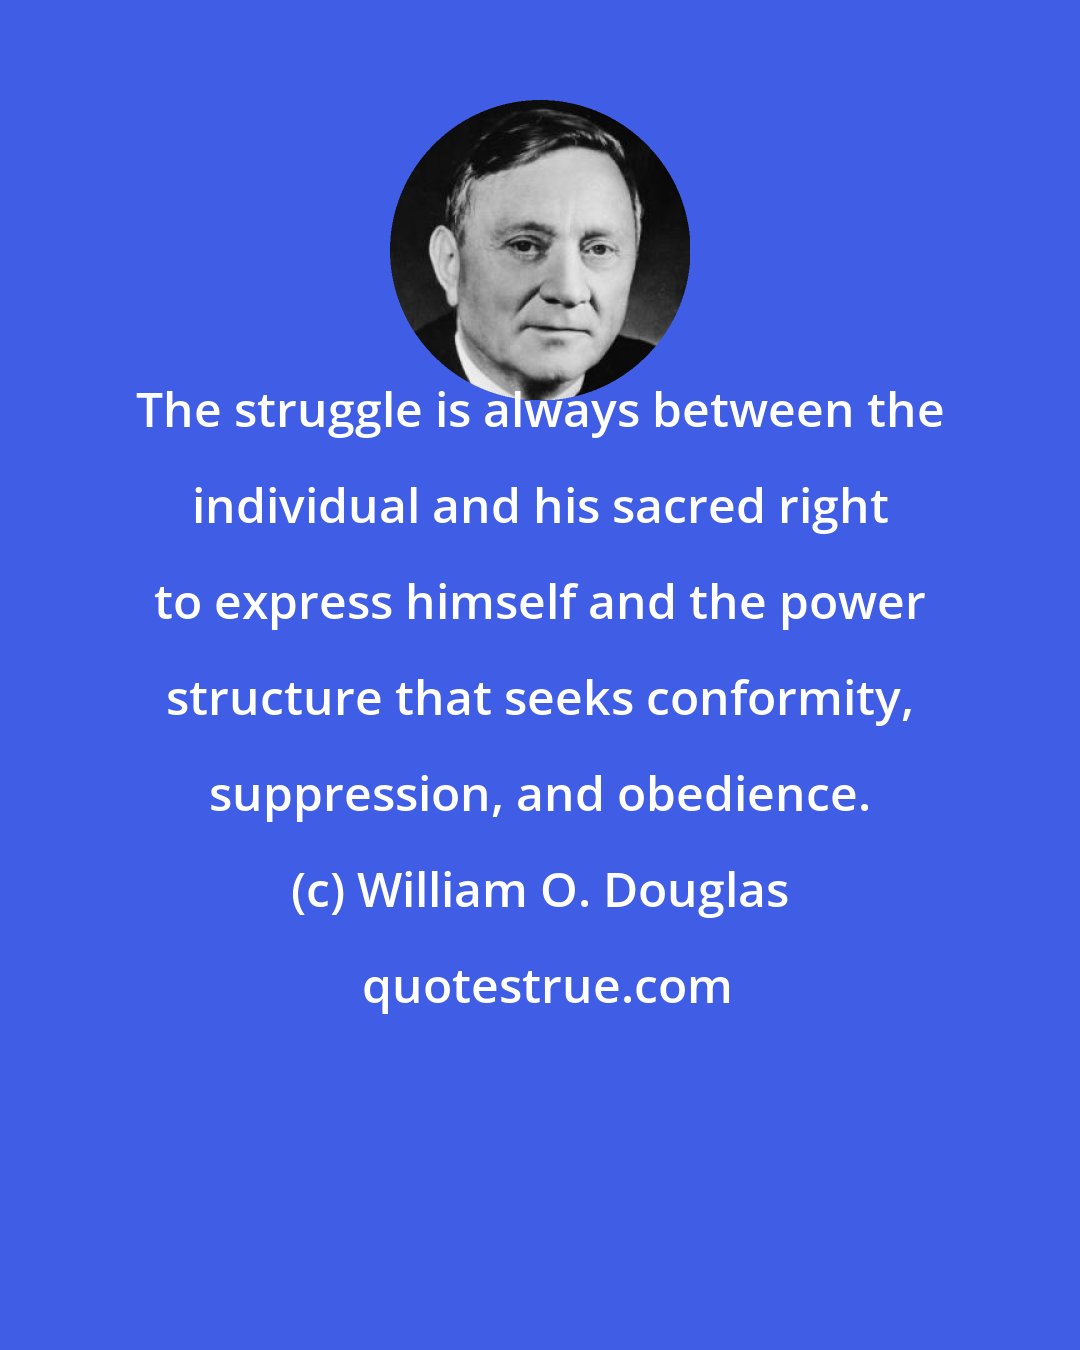 William O. Douglas: The struggle is always between the individual and his sacred right to express himself and the power structure that seeks conformity, suppression, and obedience.